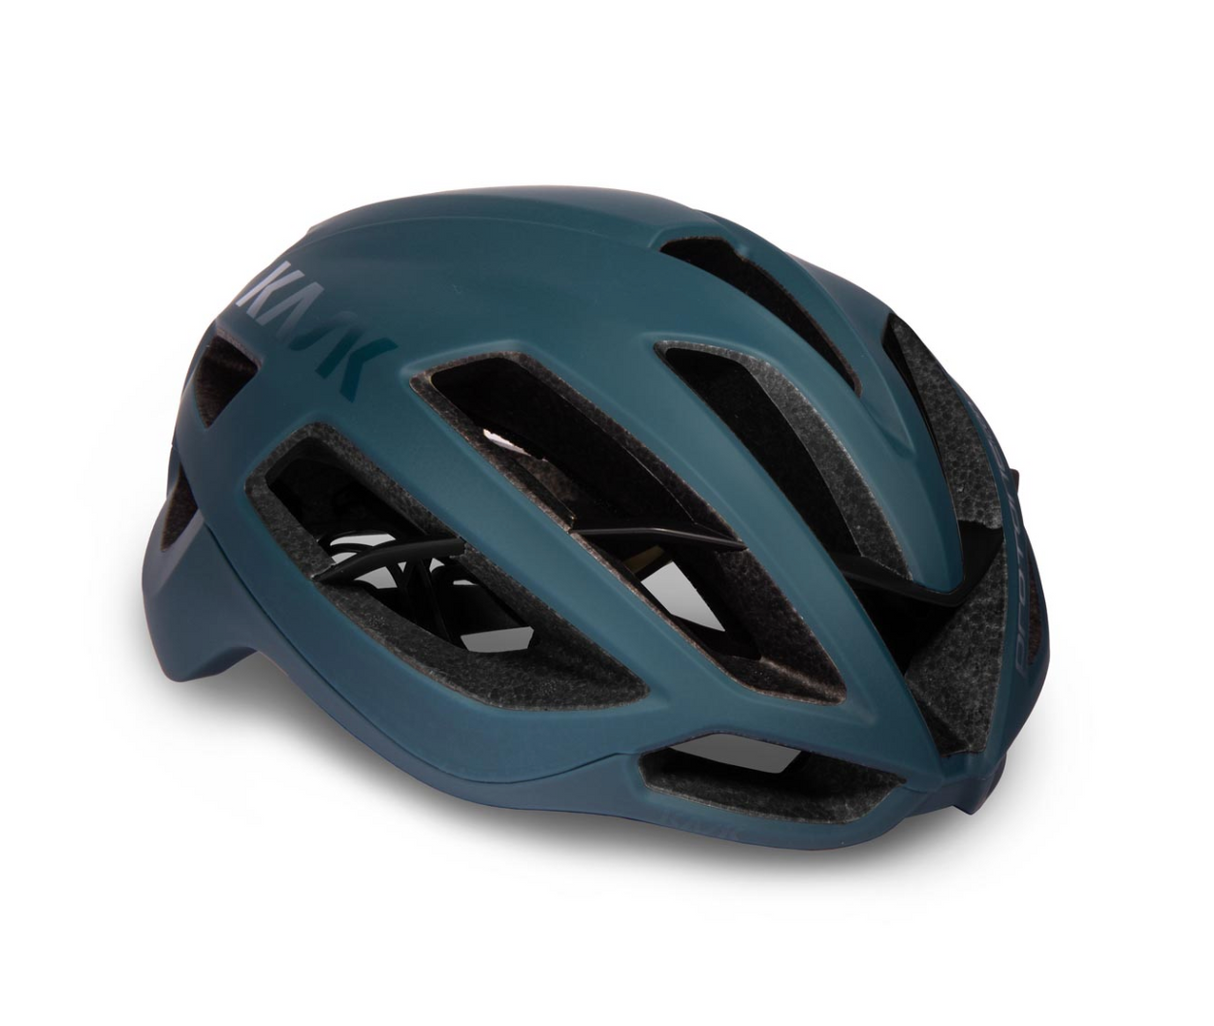 KASK Protone ICON Bicycle Helmet - Forest Green Matte - Large